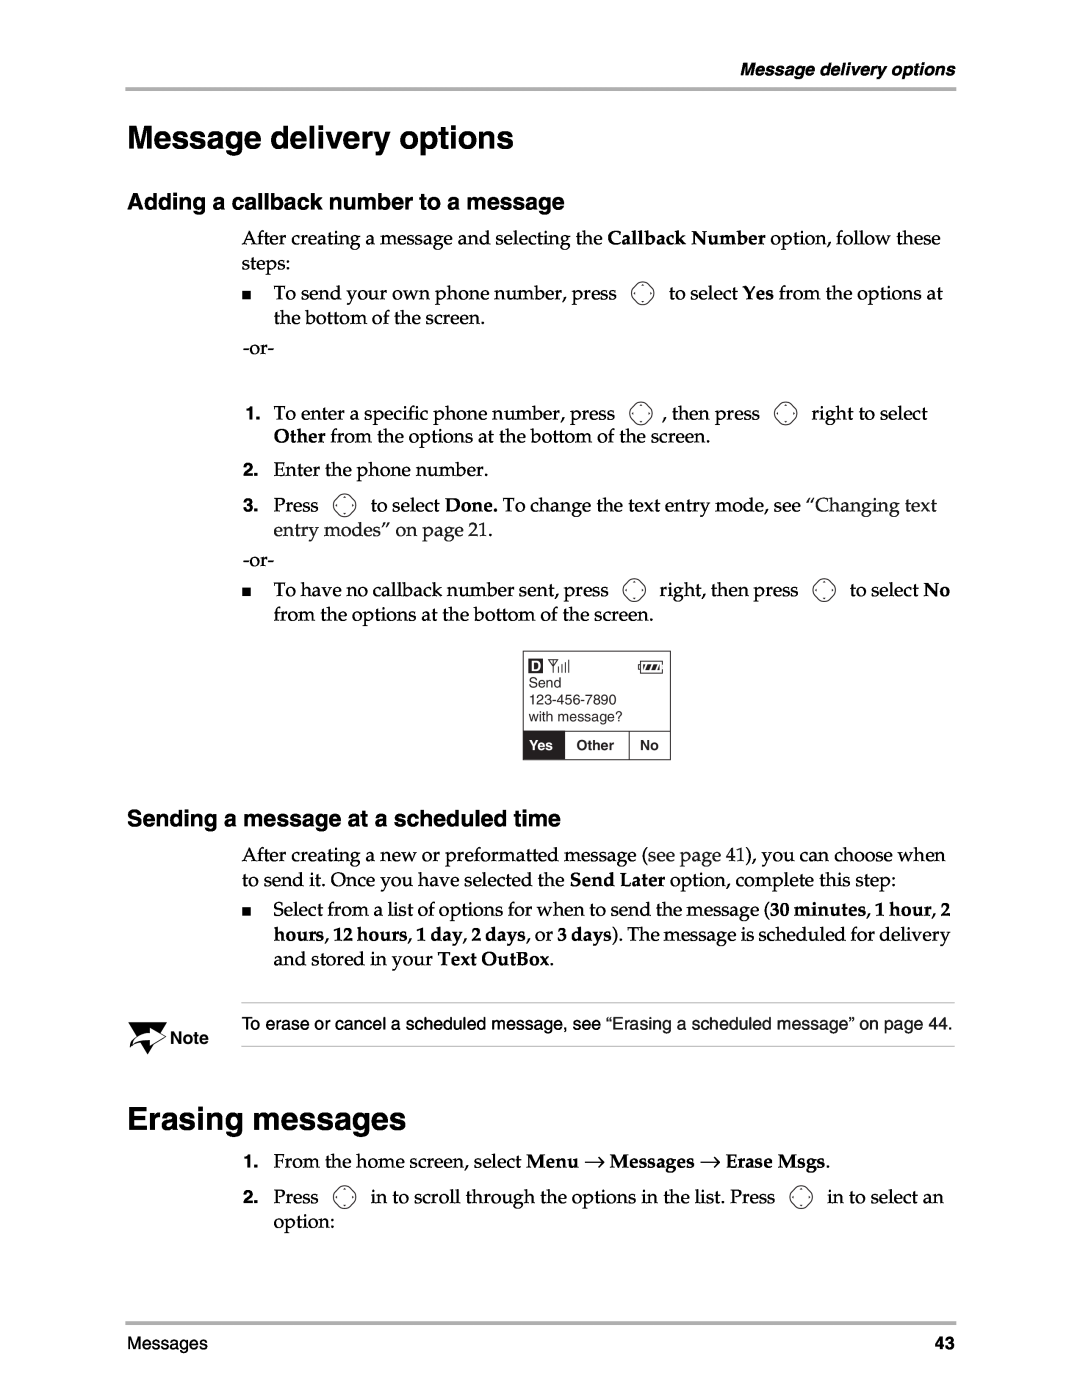 Kyocera 3035 manual Message delivery options, Erasing messages, Adding a callback number to a message 